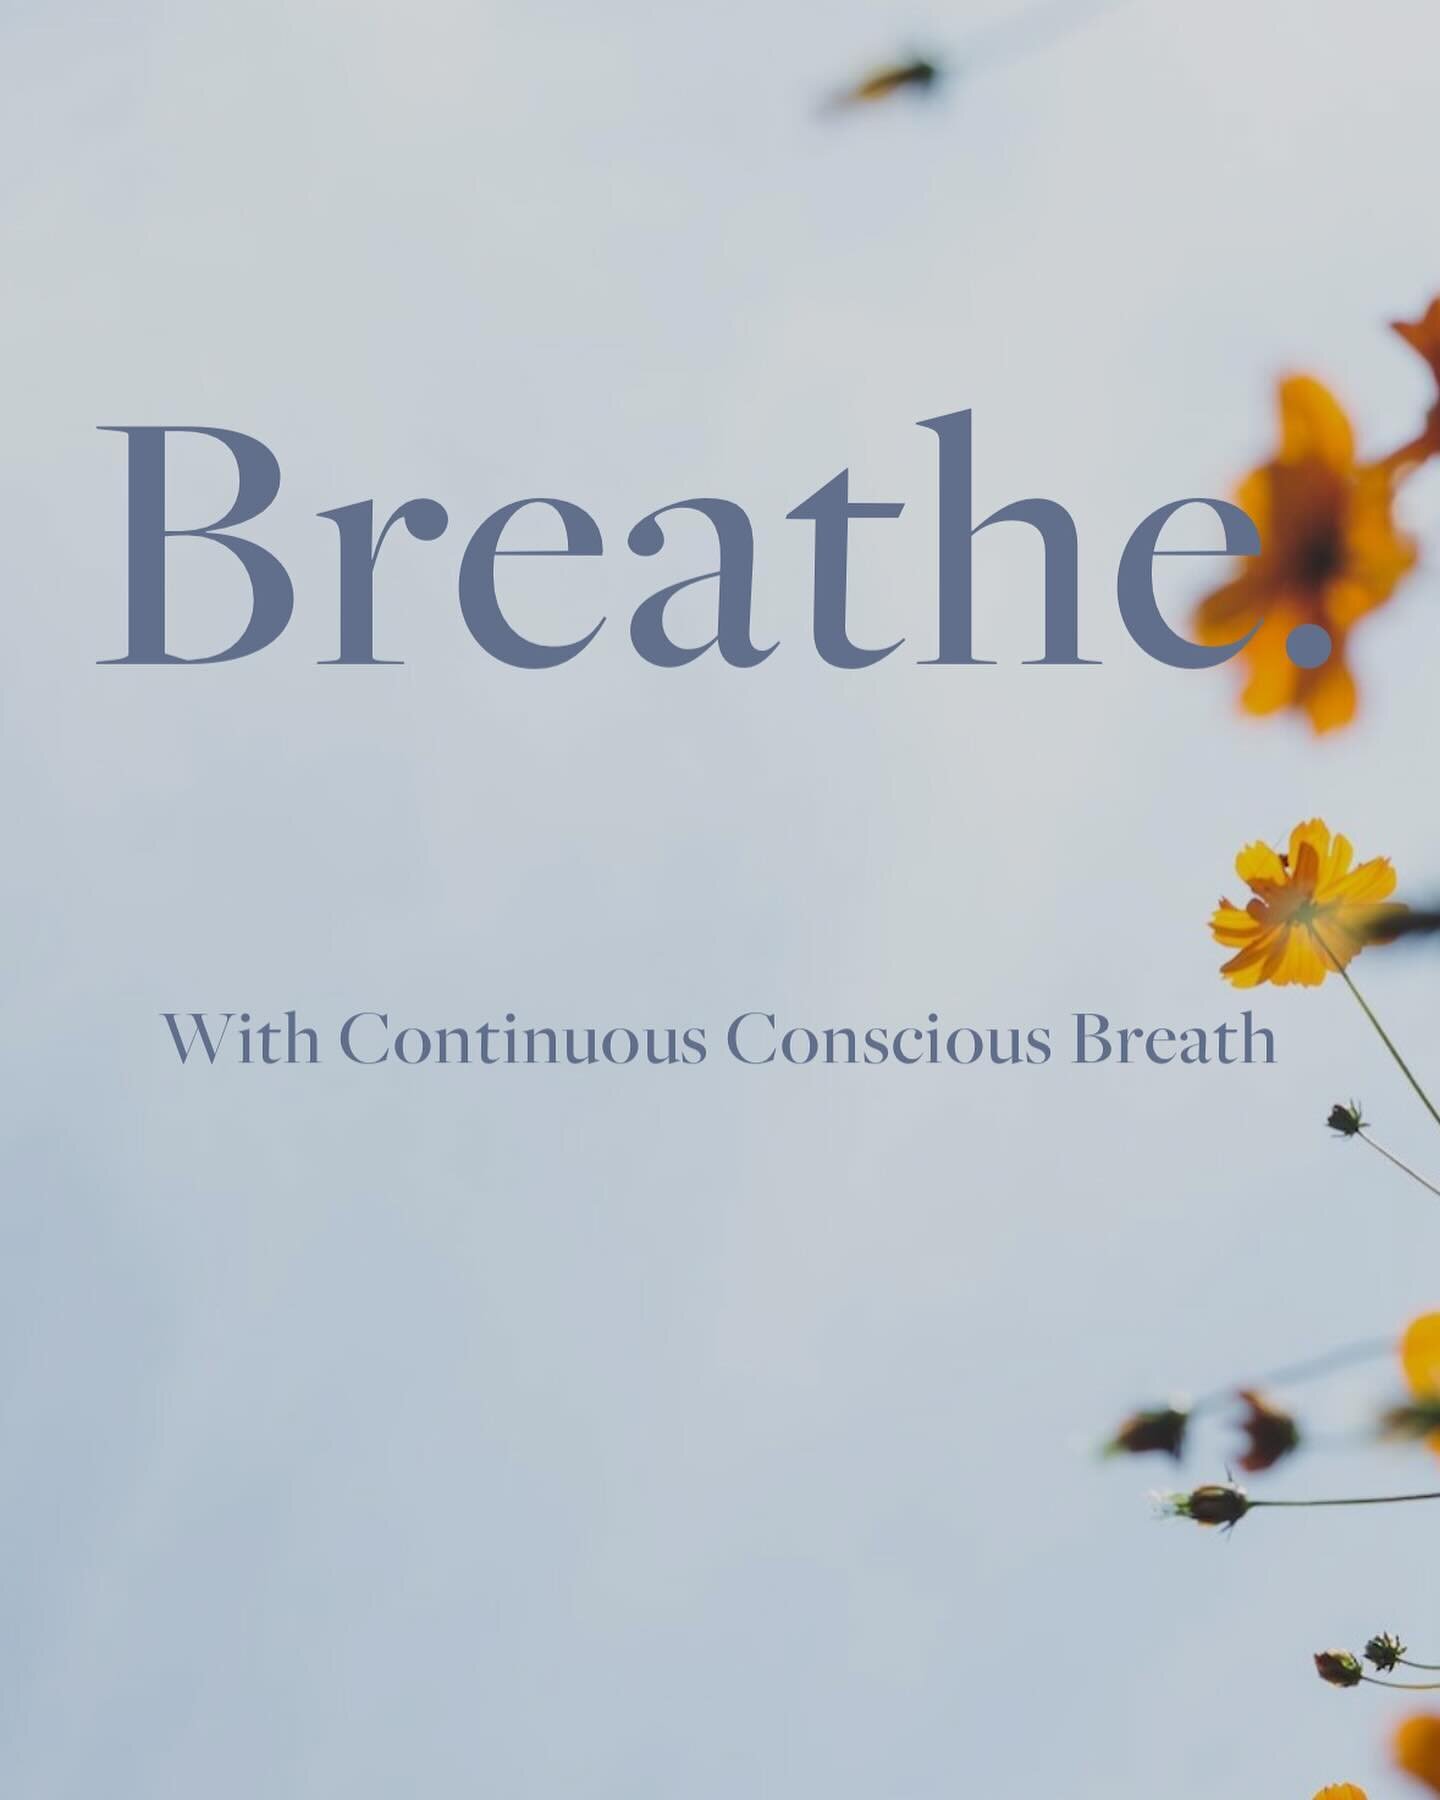 Next group breathwork SUNDAY,MARCH 24th 7pm

Breathwork: Experience it to understand.

💛 Process grief.
💛Calm your negative thoughts, quiet your busy mind, stabilize your emotions, and cultivate a profound feeling of tranquility inside.
💛Help you 